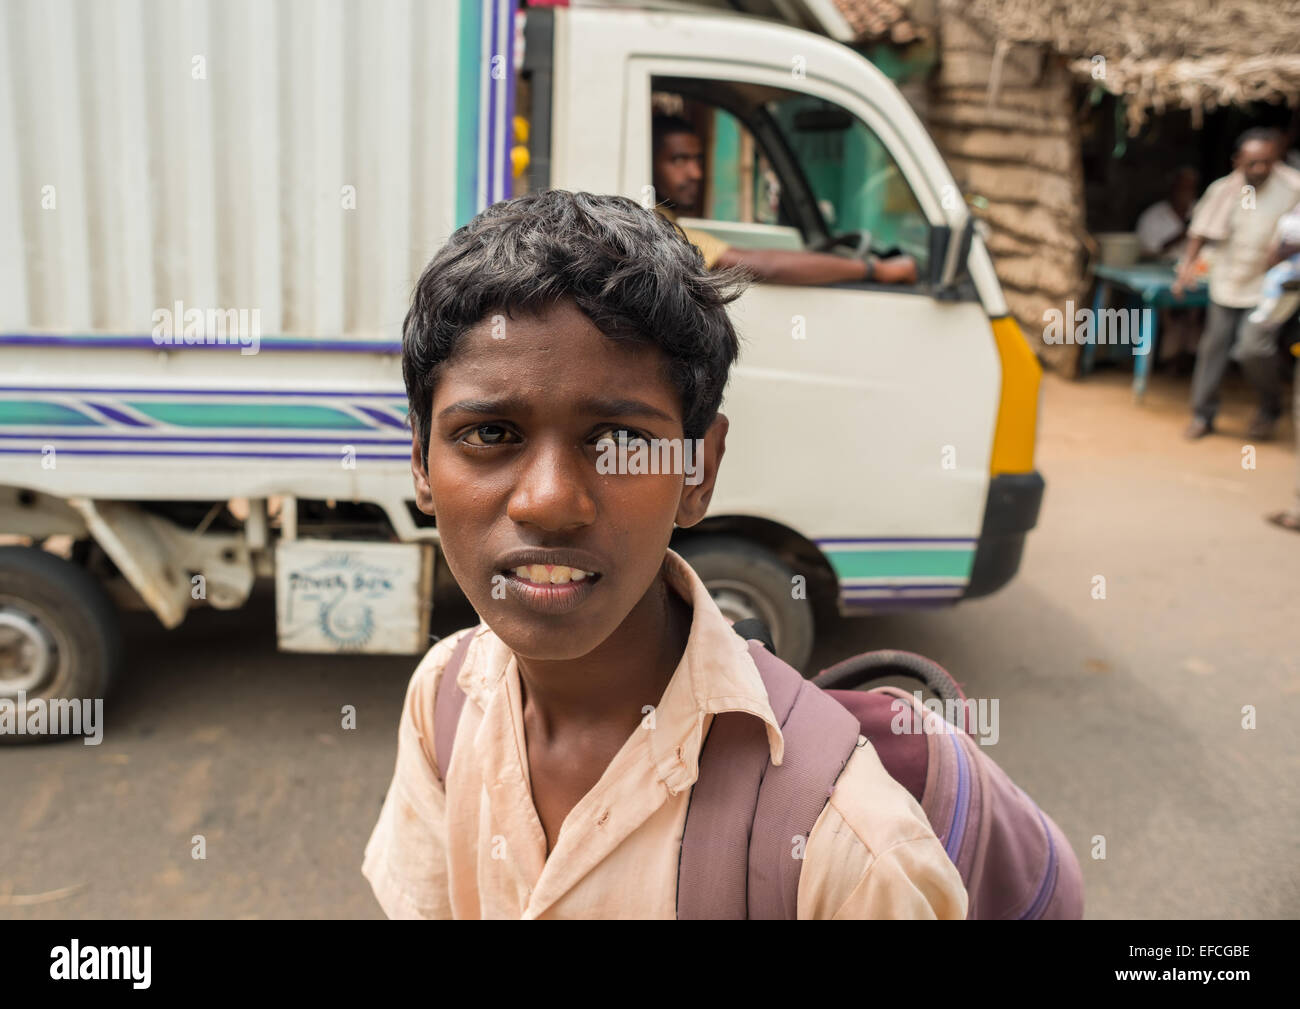 Thanjavur, India - February13: An unidentified student in uniform going home after classes at school. India, Tamil Nadu, near Th Stock Photo